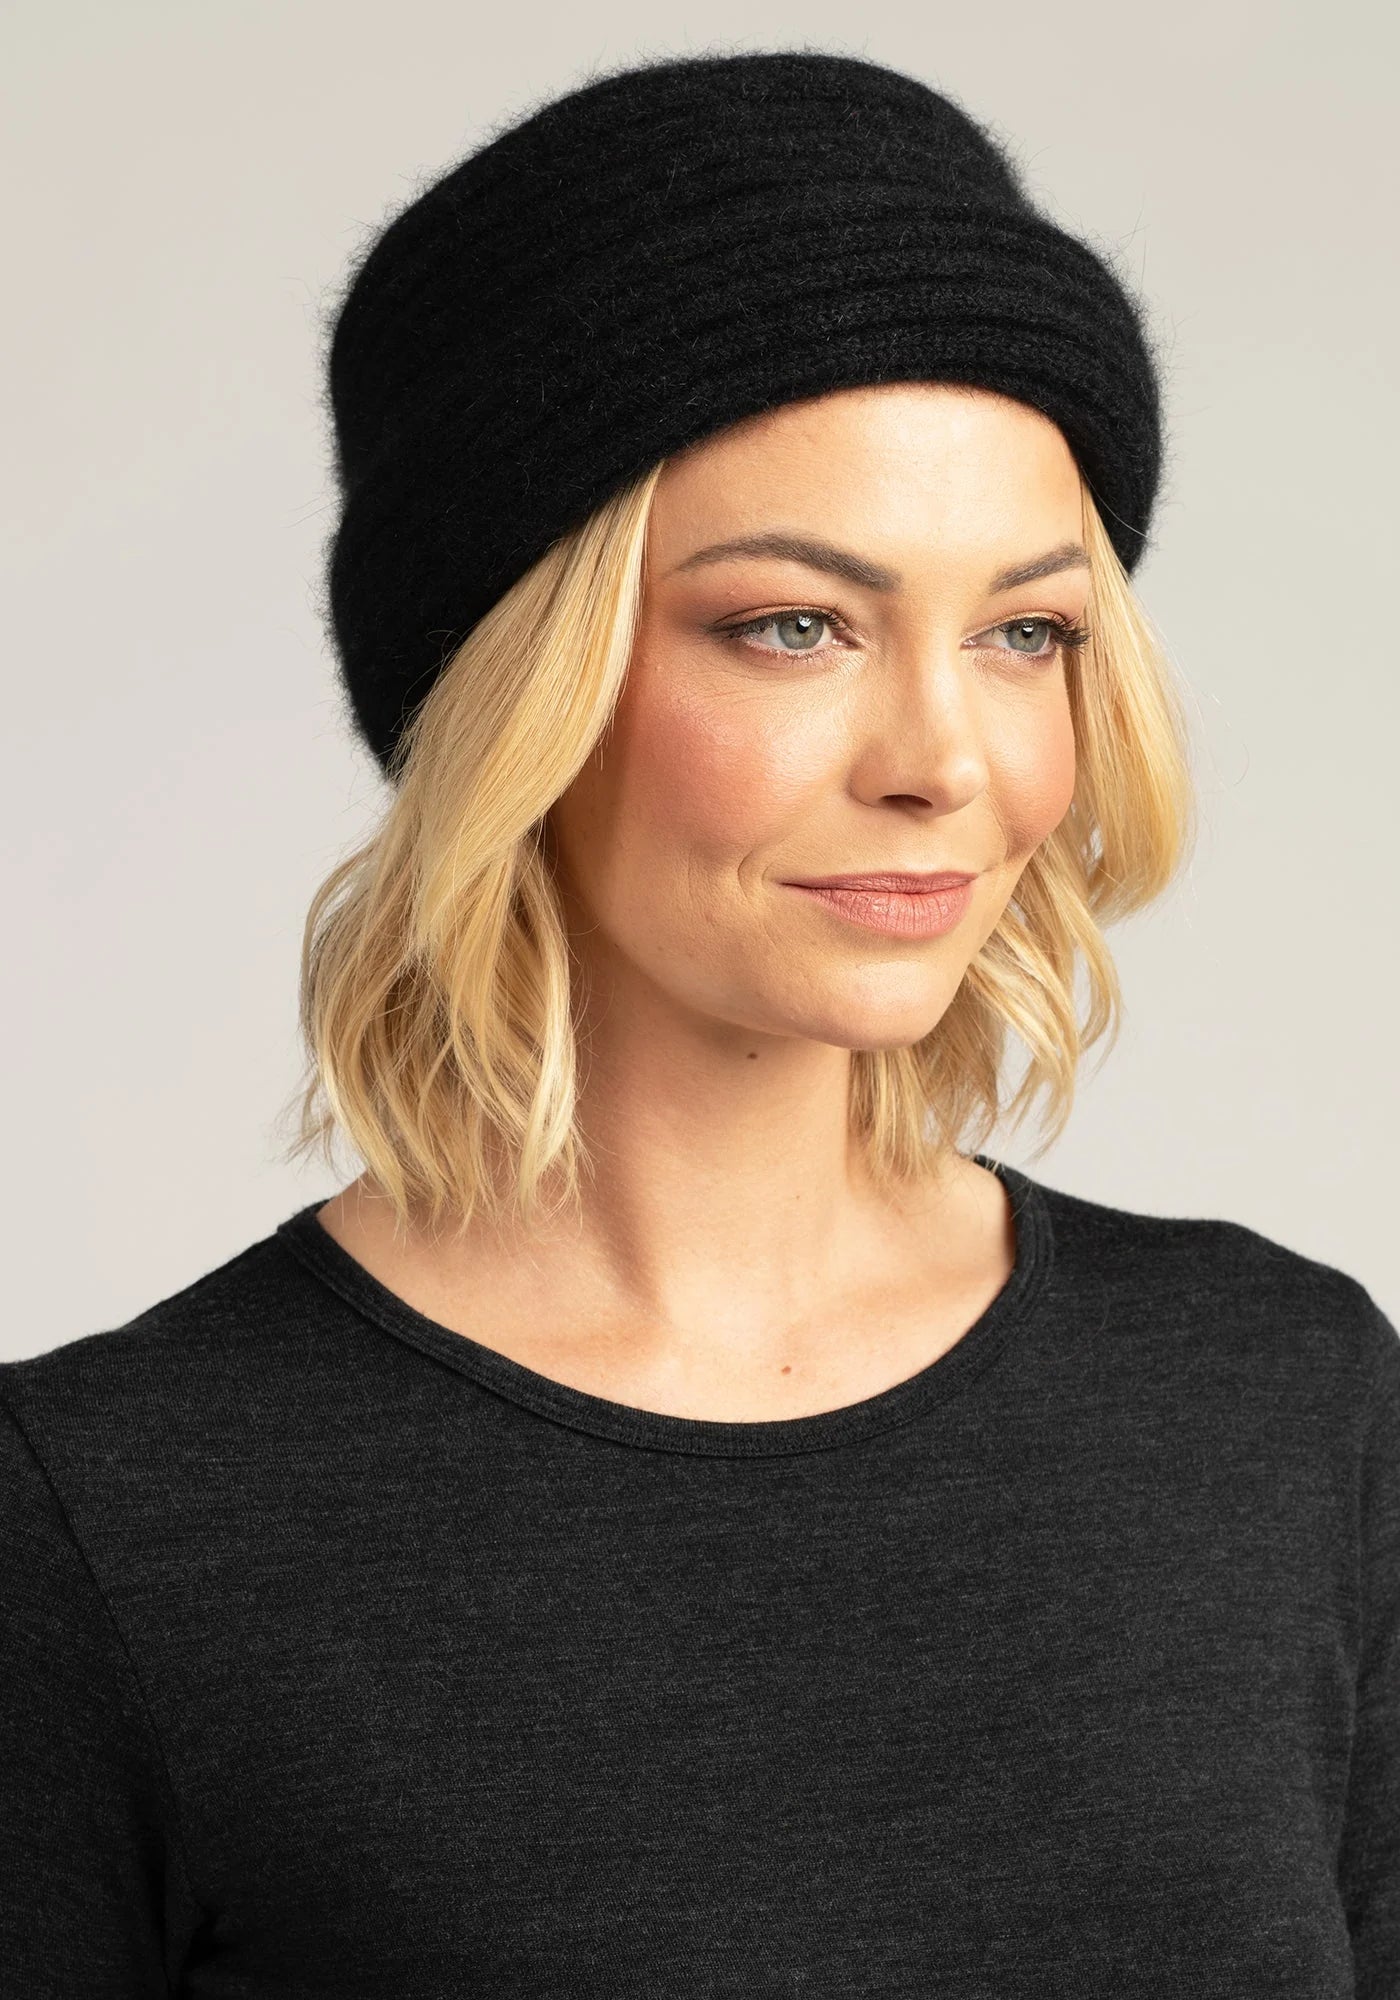 Stay cozy &amp; stylish with our black Merino knit hat. Soft, warm, &amp; versatile. Get yours now!